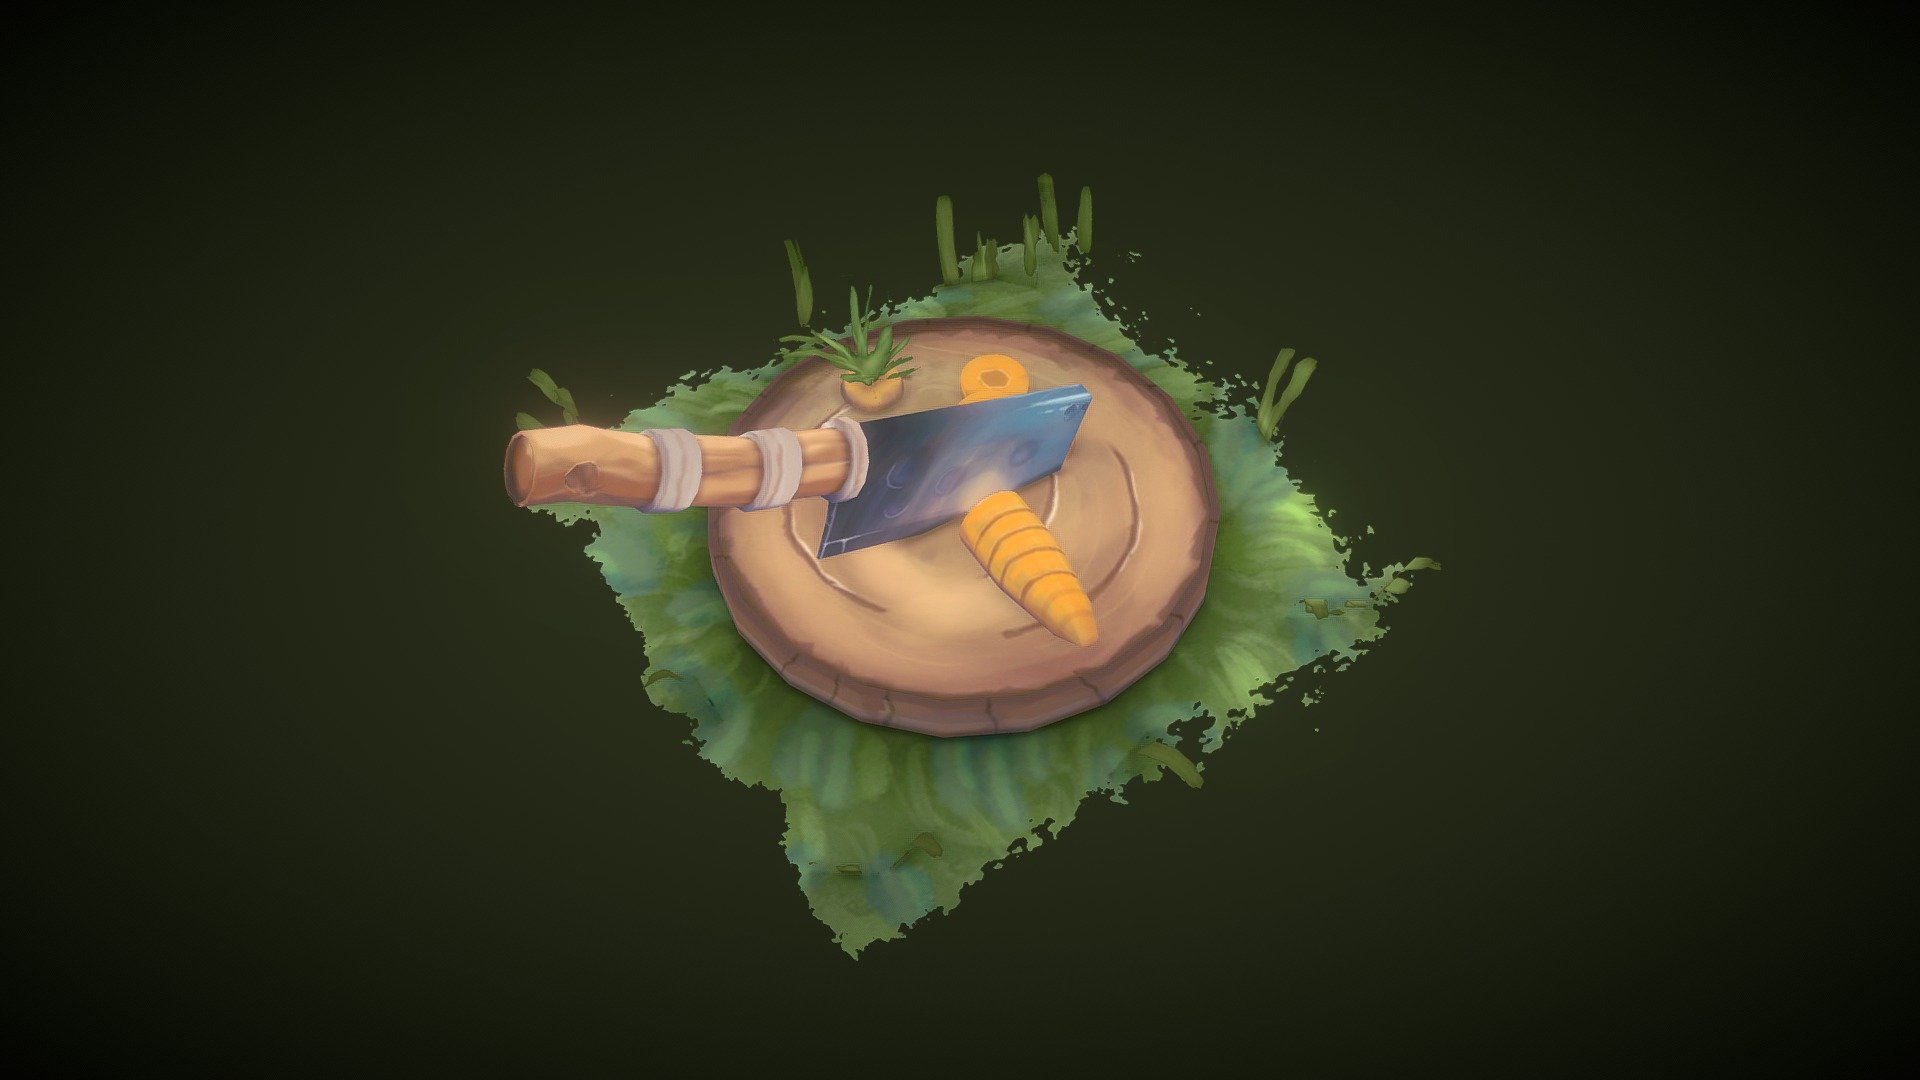 First Time handpainted in substance painter.
with tutorial from stylized station and Maxence Rey-millet.
I'm really happy how it looks and will experiment further :) - Handpainted Cutting Knife - 3D model by Yvette Kooke (@YvetteKooke) 3d model